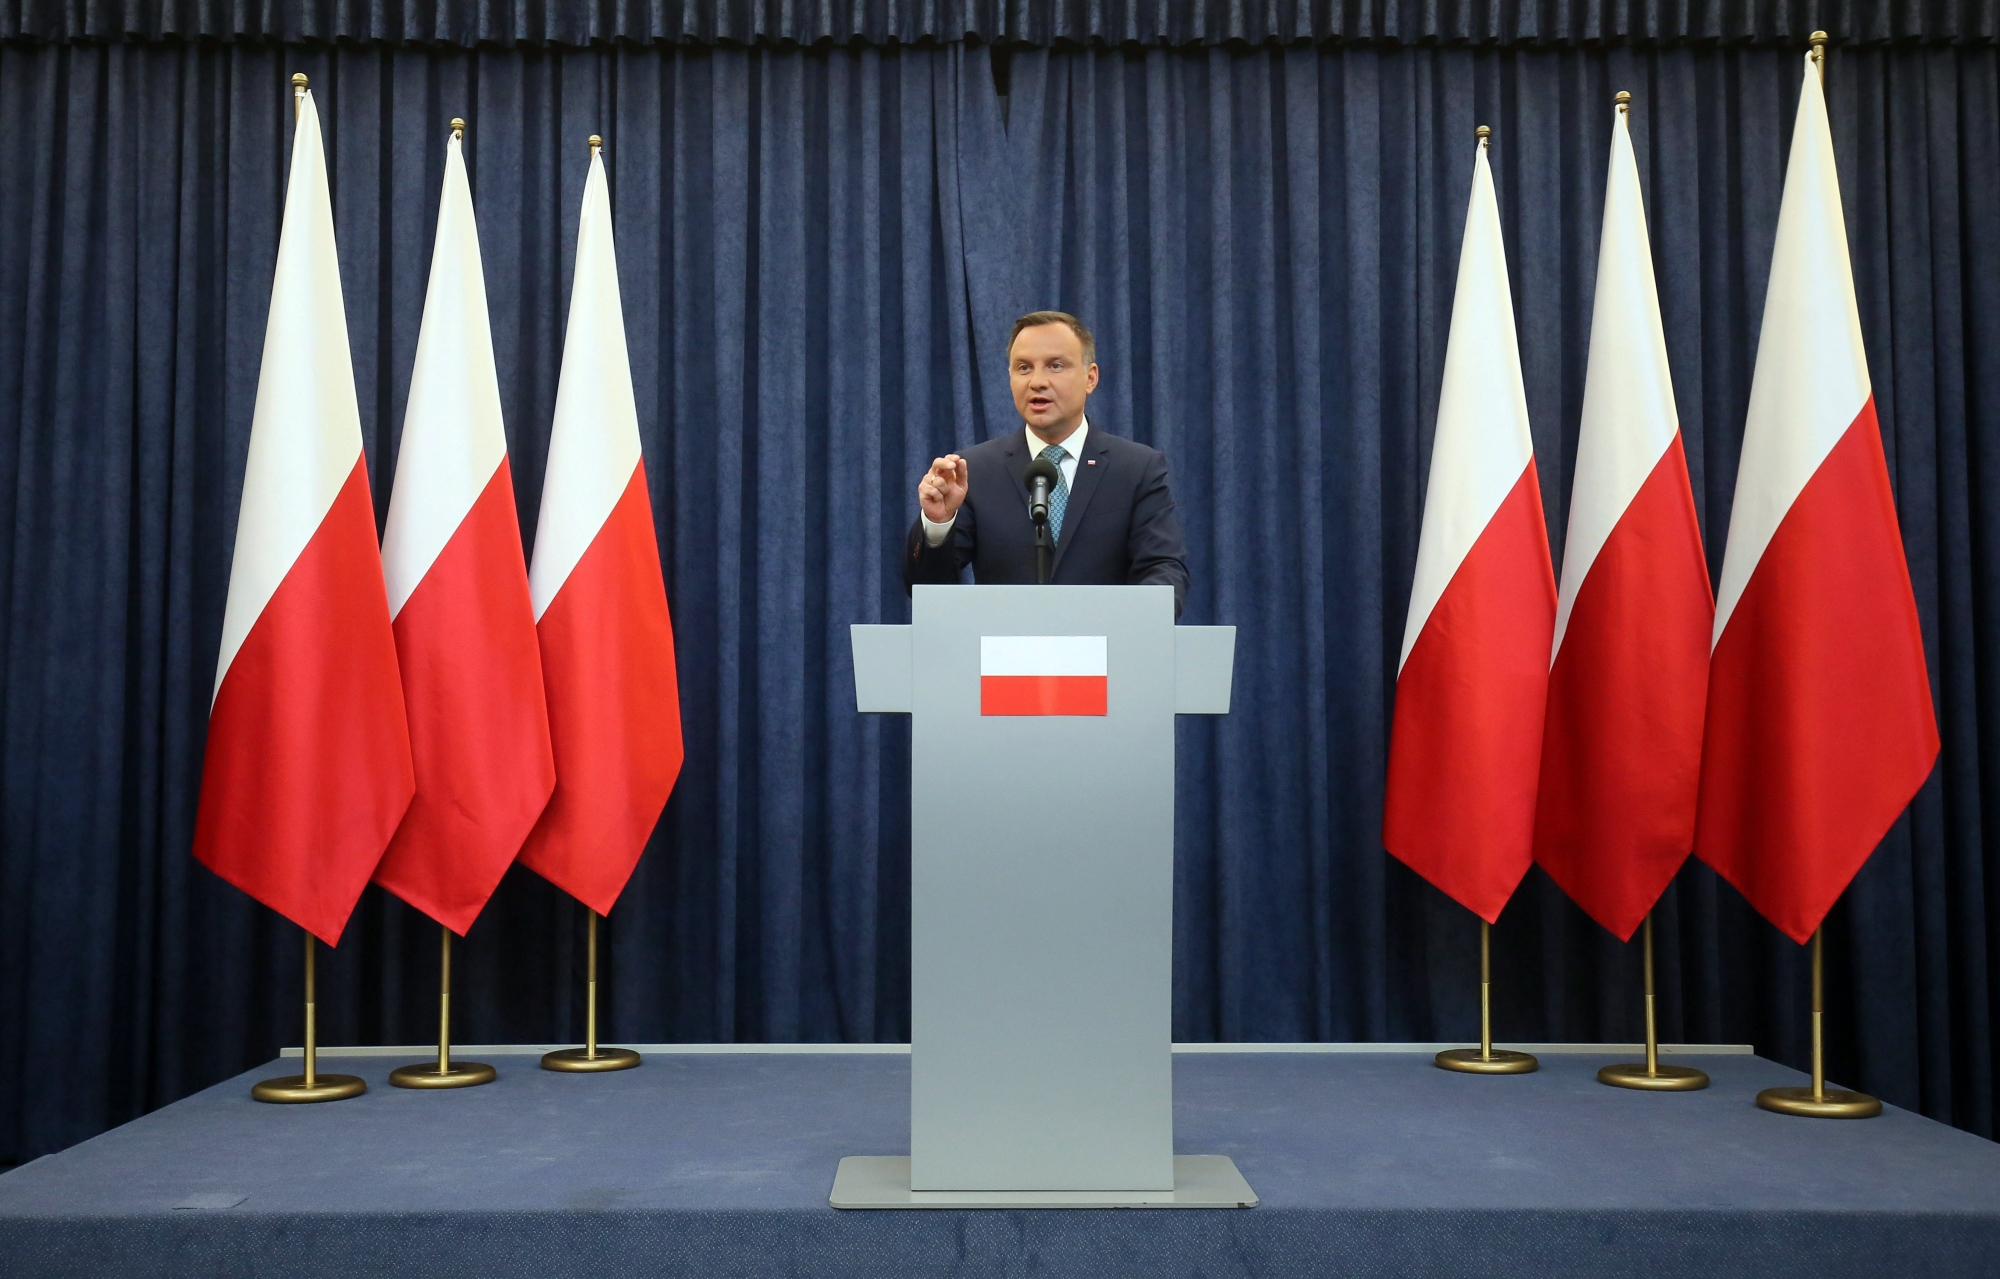 epa06106454 Polish President Andrzej Duda during a press conference in the Presidential Palace in Warsaw, Poland, 24 July 2017. President Duda said in a statement that he will veto Supreme Court and National Judiciary Council bills. Large protests have been held across Poland in the past week over rules passed 20 July by the ruling party that would limit the independence of the judiciary.  EPA/Pawel Supernak POLAND OUT POLAND POLITICS JUDICARY SYSTEM